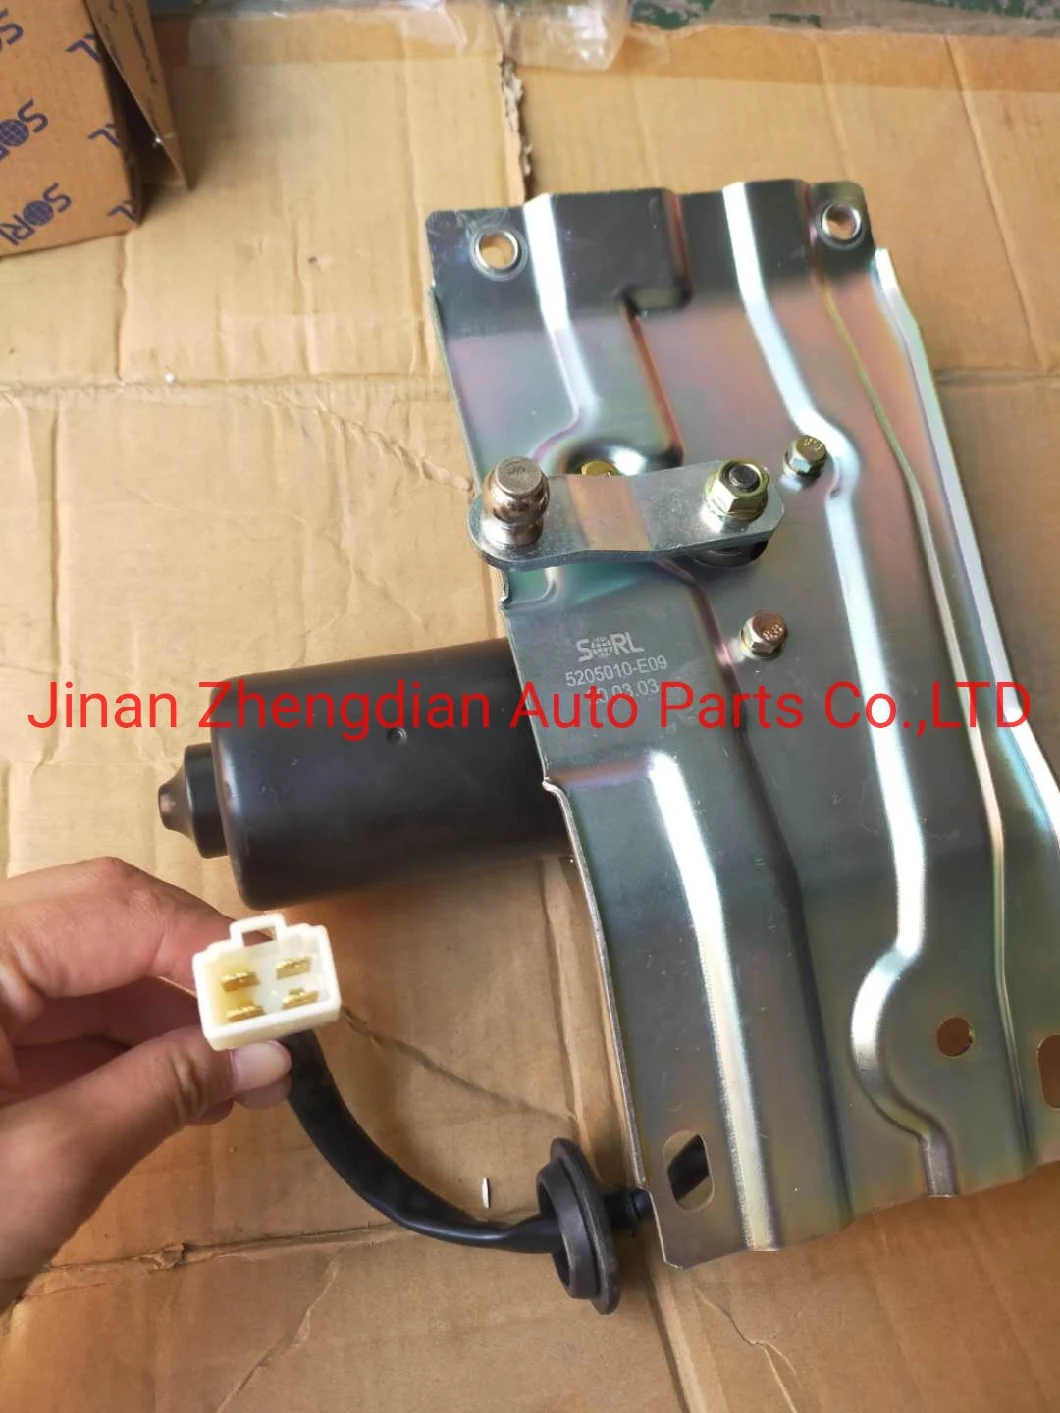 5205010-E09 Truck Wiper Motor with Plate for FAW Rhd Truck Spare Parts Beiben North Benz Sinotruk HOWO Shacman FAW Truck Wiper Arm Wiper Blade